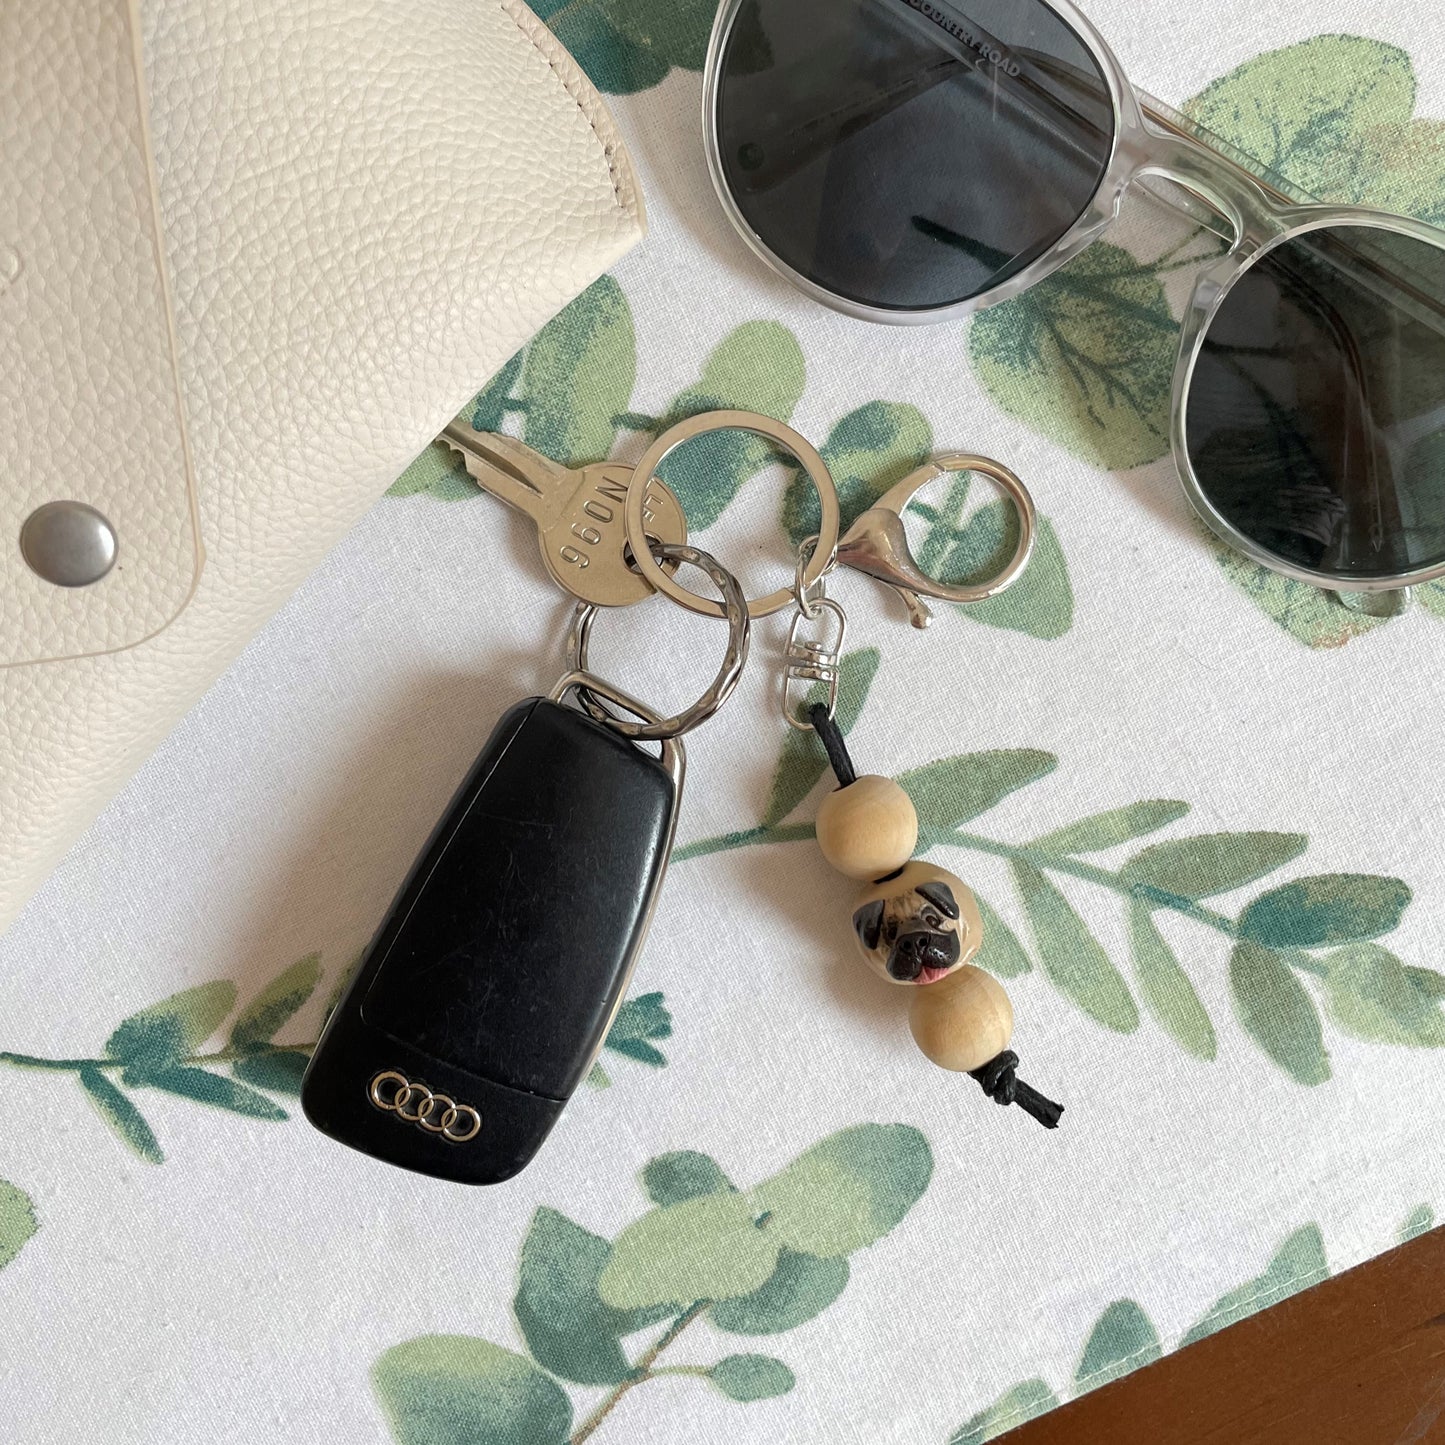 Handmade timber and polymer clay pug dog keychain on white floral tablecloth beside sunglasses